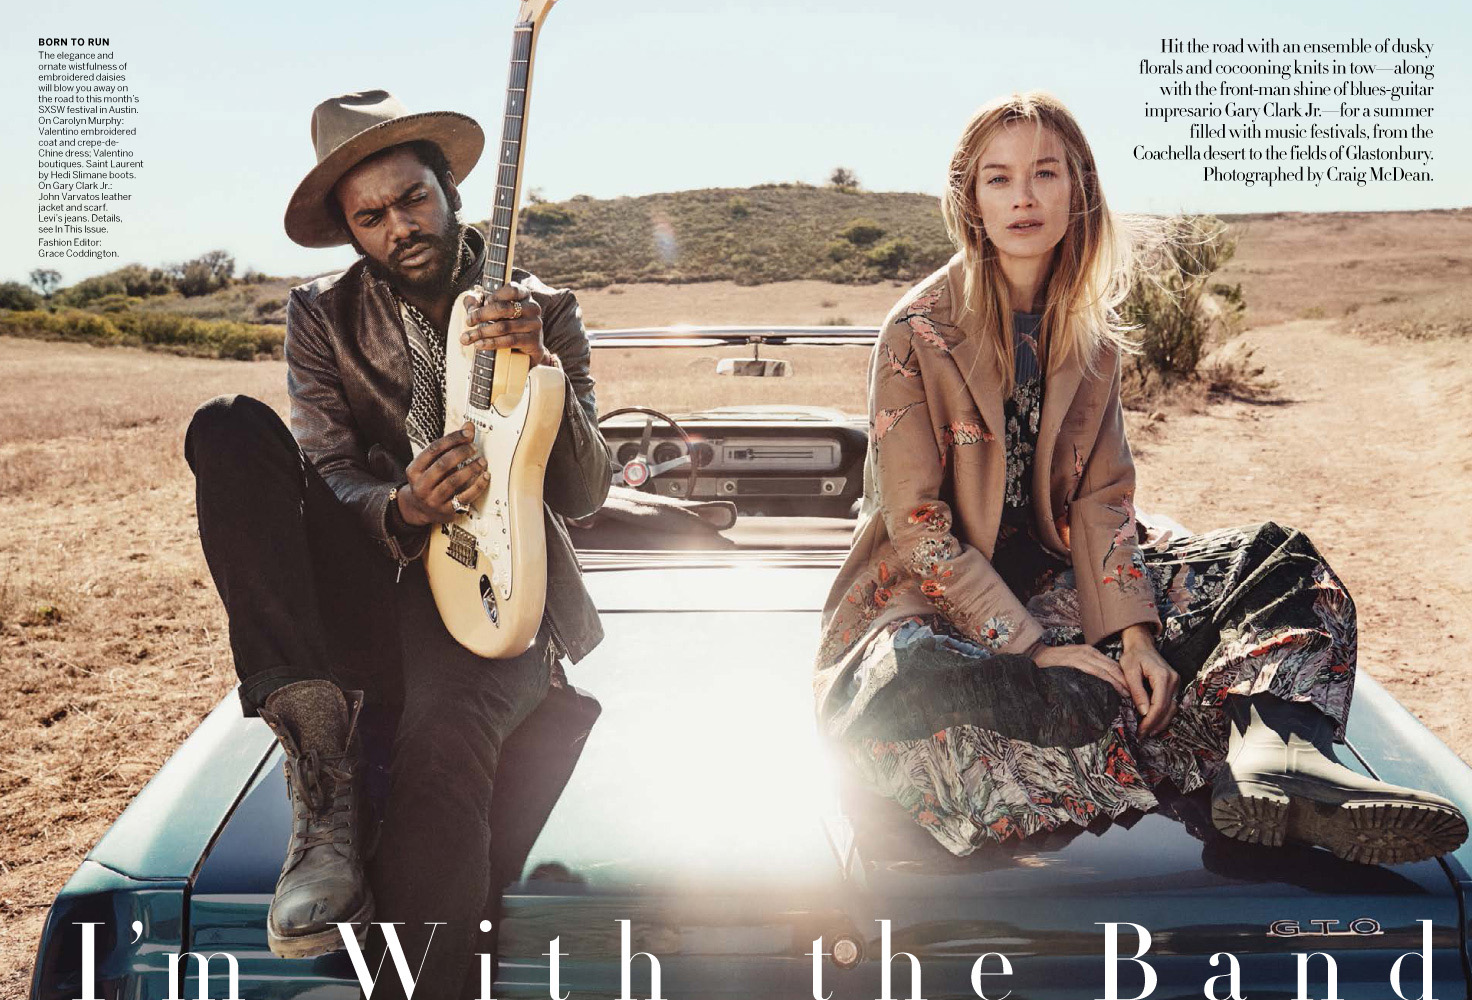 Michael Philouze | Vogue US: I'm With the Band | 2